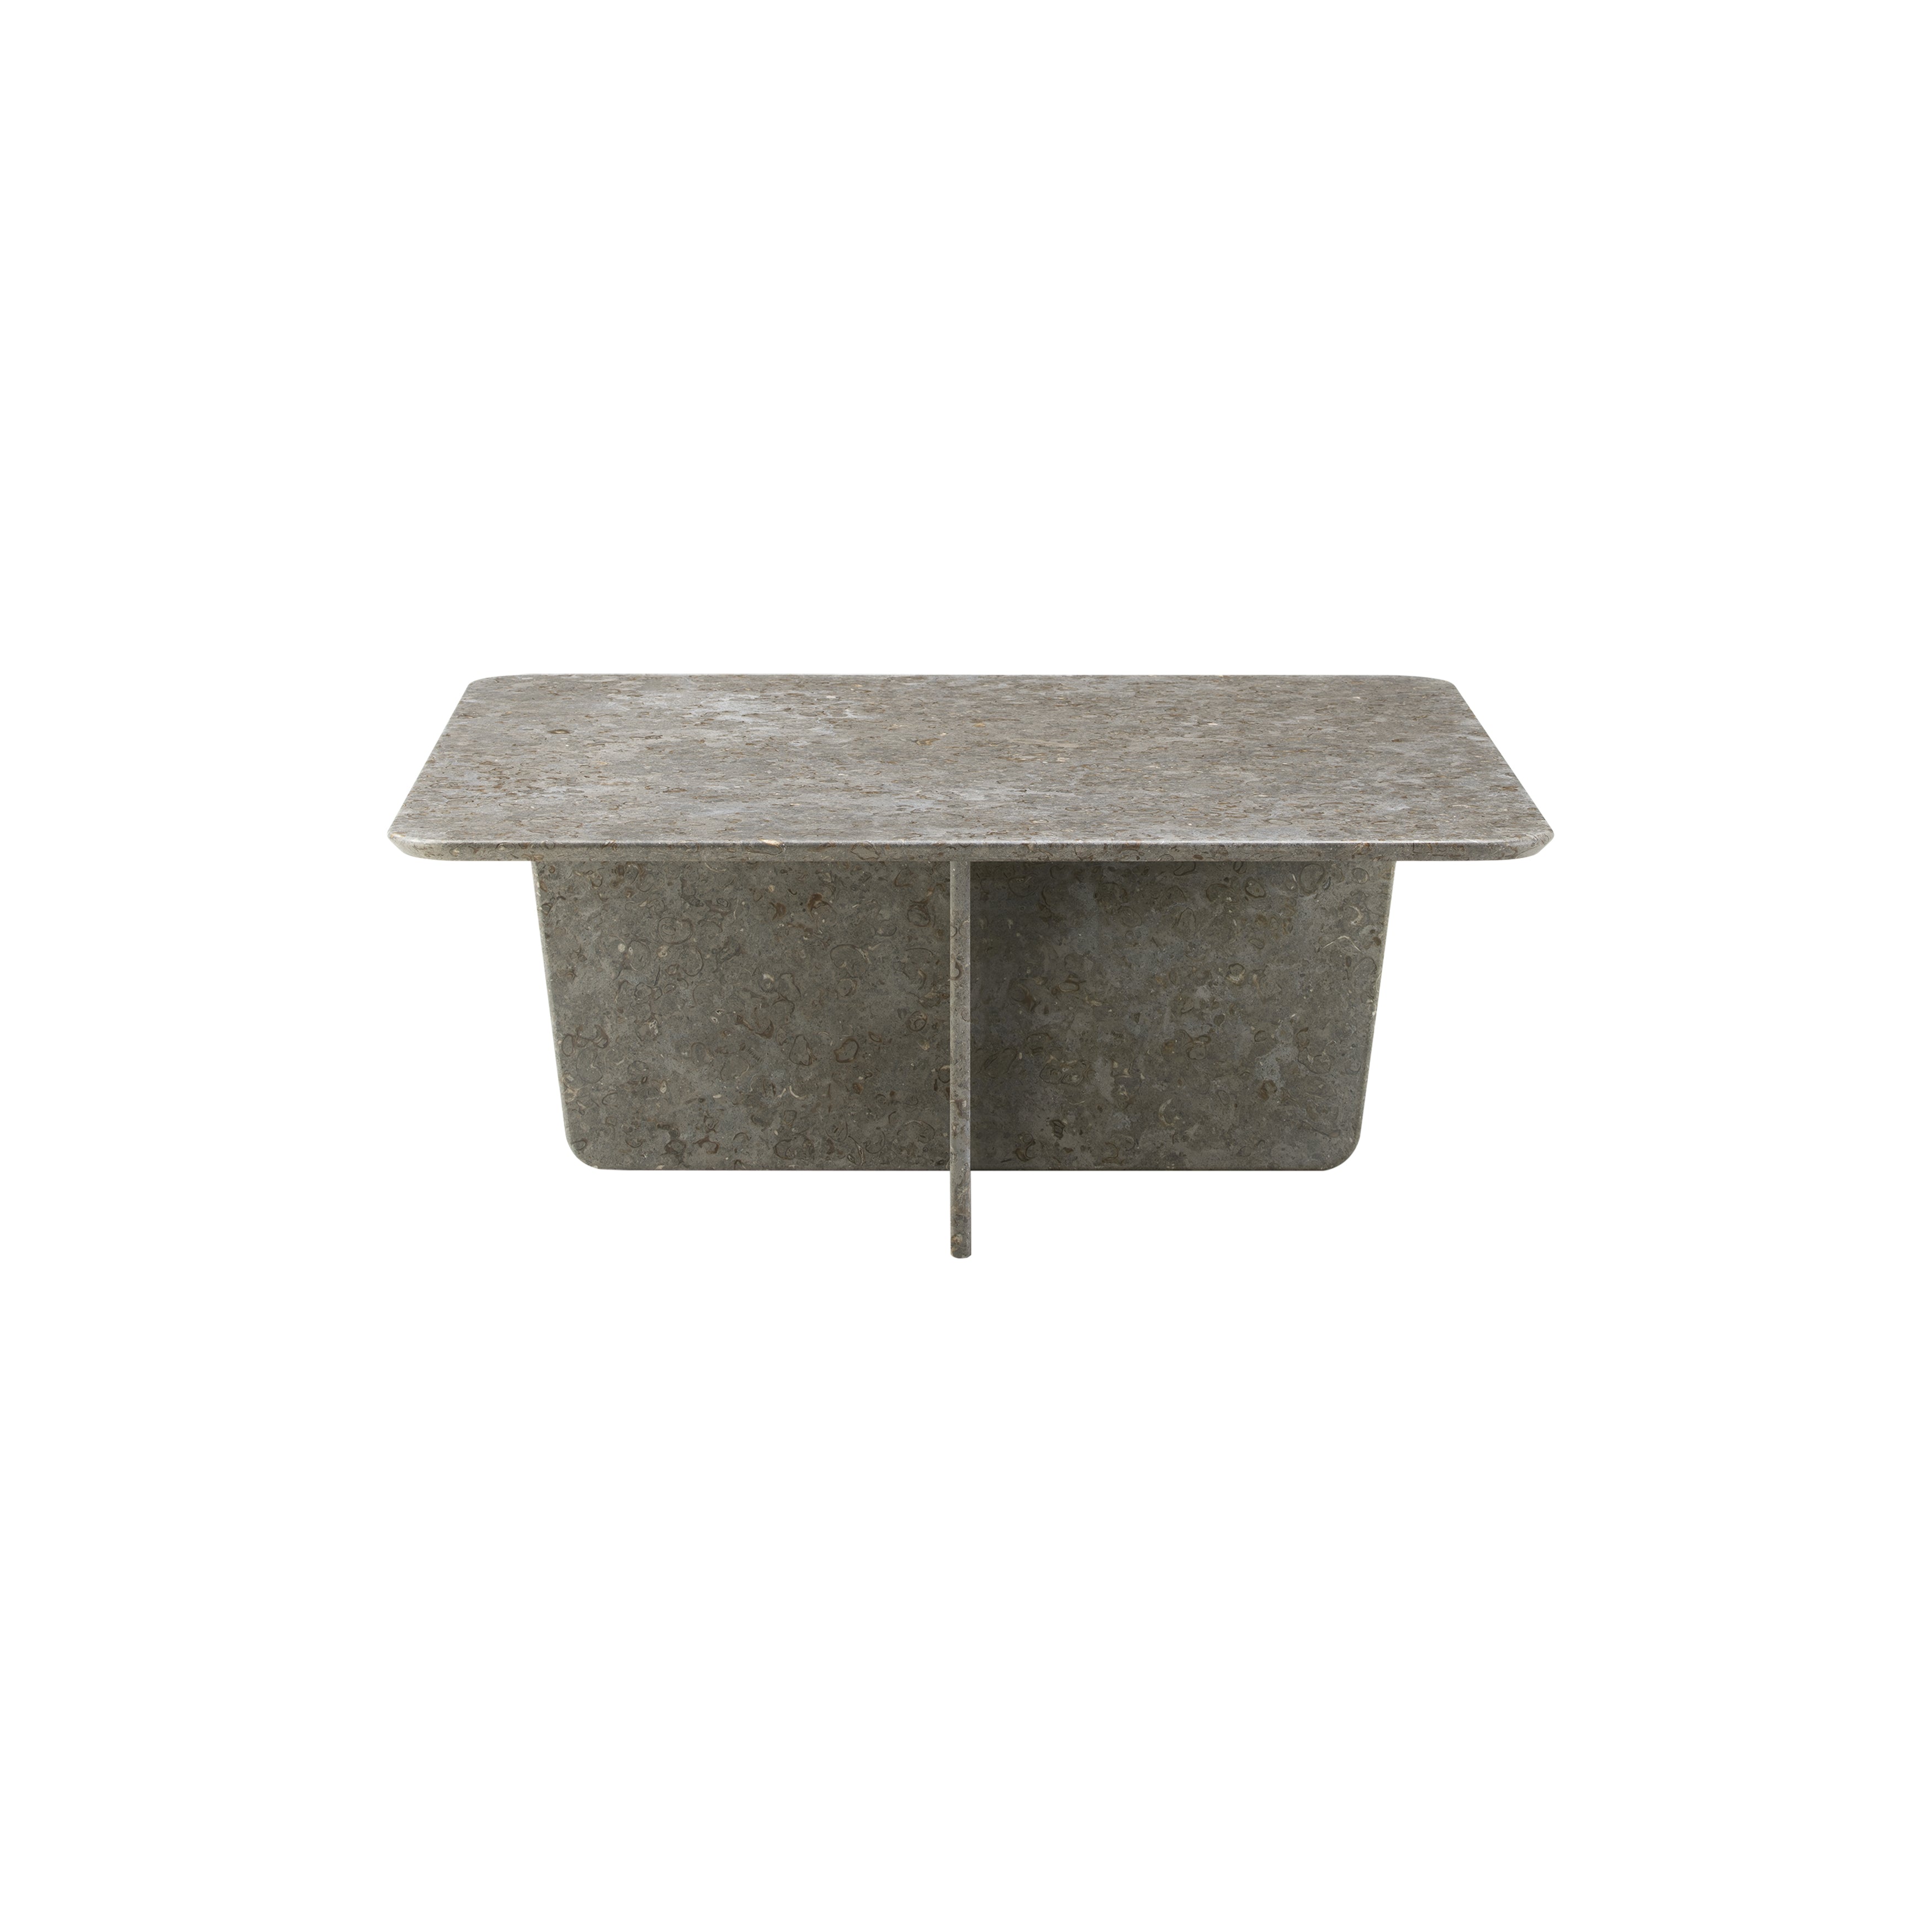 Tableau Coffee Table: Square + Small - 39.4